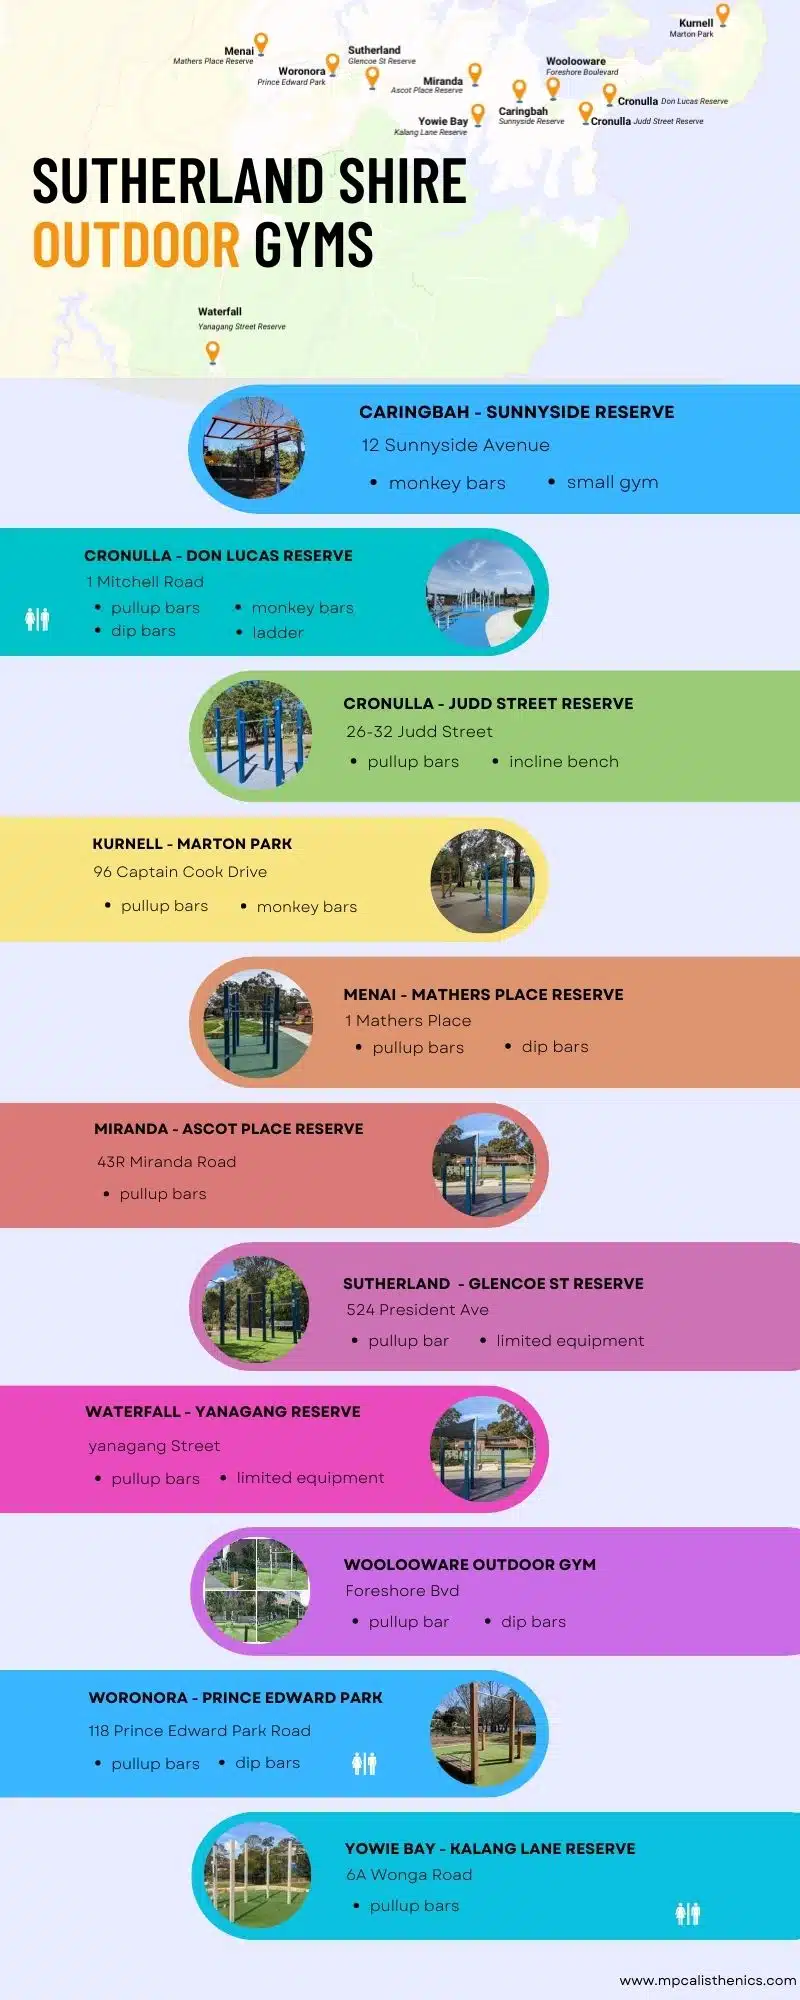 Outdoor Gyms in The Sutherland Shire Infographic